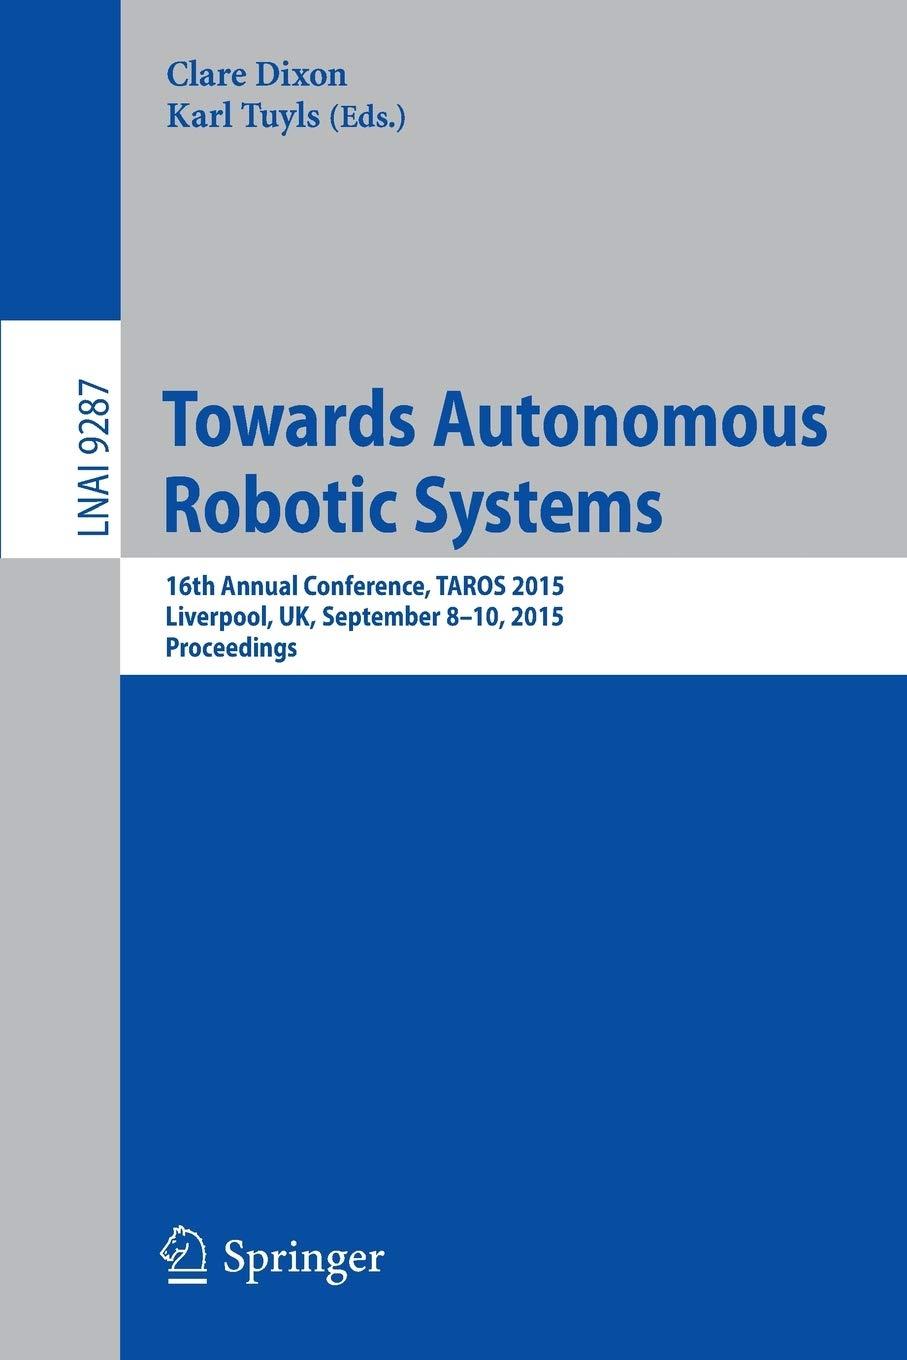 towards autonomous robotic systems 16th annual conference  taros 2015  liverpool  uk  september 8-10  2015 